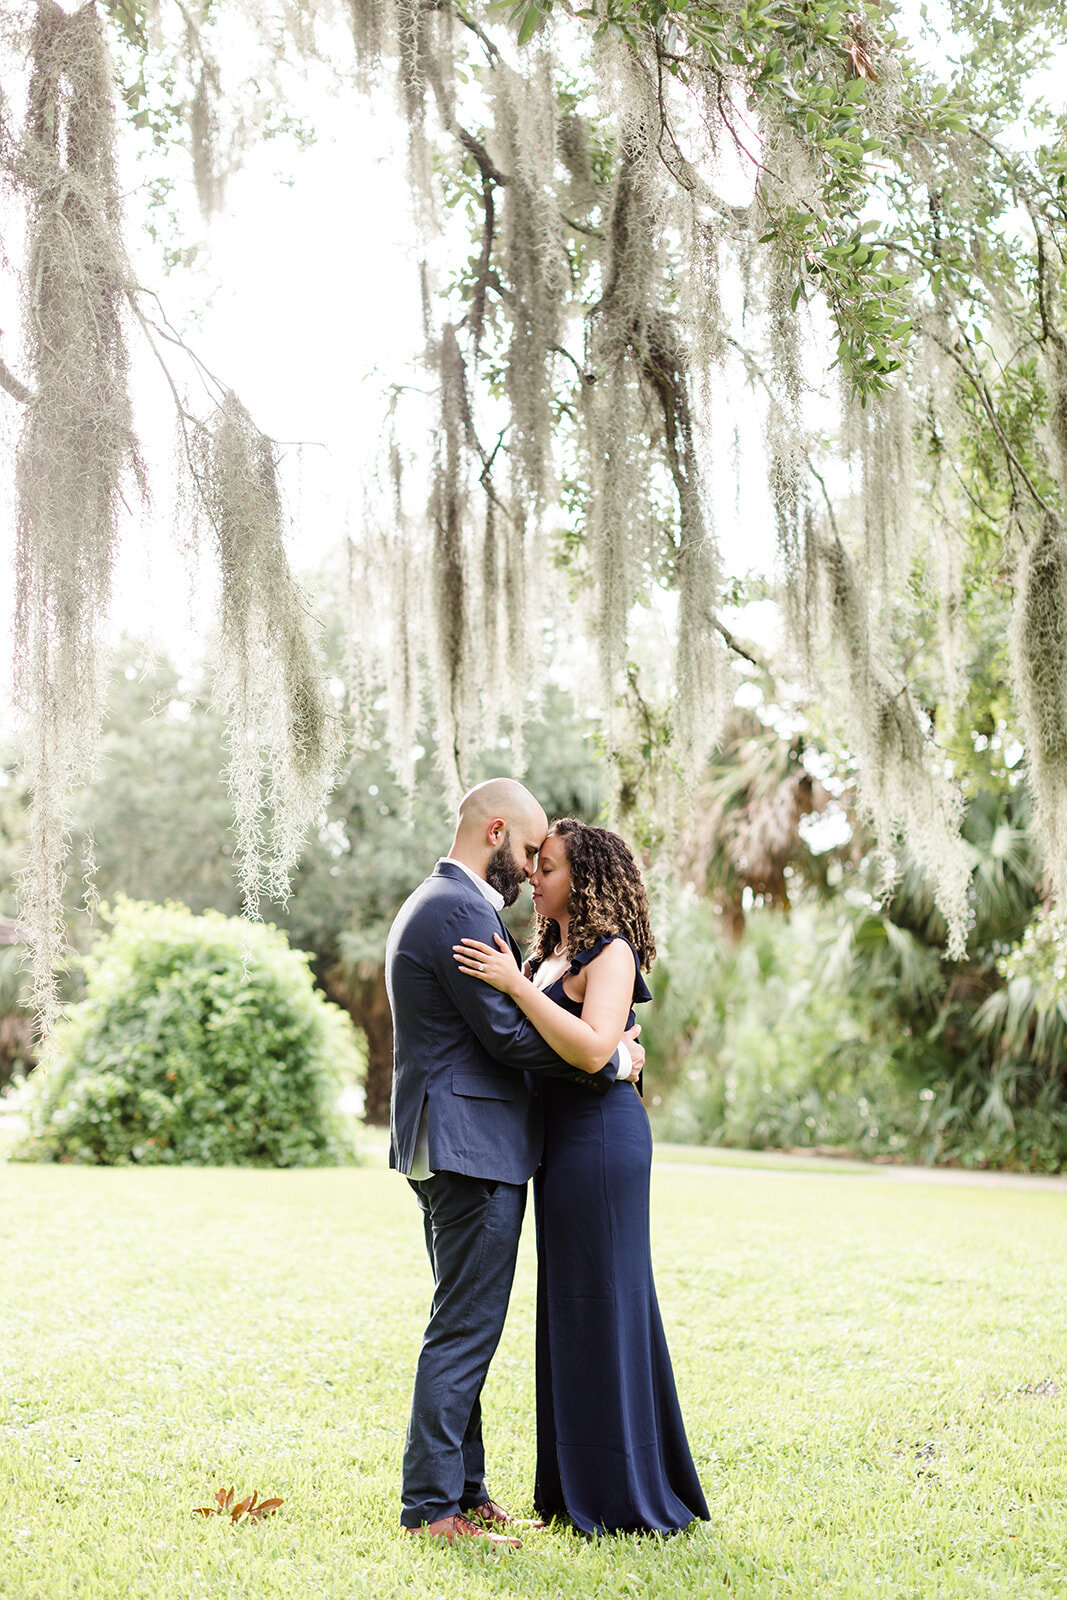 Engagement photo of couple in New Orleans, Louisiana at City Park under moss covered trees